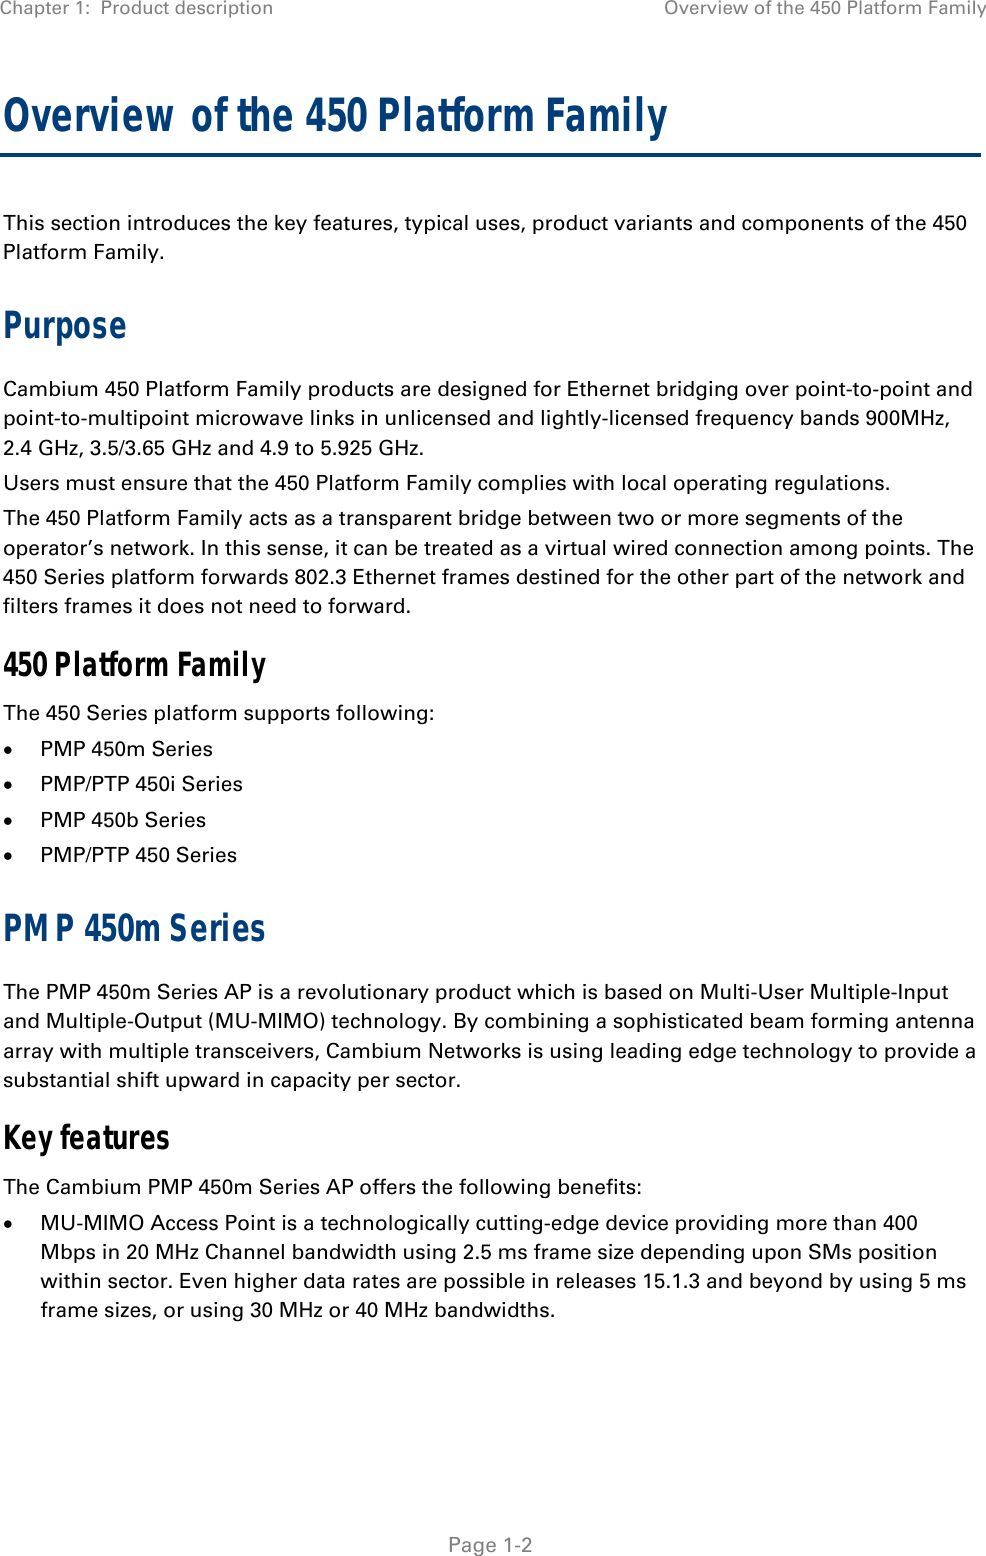 Chapter 1:  Product description  Overview of the 450 Platform Family   Page 1-2 Overview of the 450 Platform Family  This section introduces the key features, typical uses, product variants and components of the 450 Platform Family. Purpose Cambium 450 Platform Family products are designed for Ethernet bridging over point-to-point and point-to-multipoint microwave links in unlicensed and lightly-licensed frequency bands 900MHz, 2.4 GHz, 3.5/3.65 GHz and 4.9 to 5.925 GHz. Users must ensure that the 450 Platform Family complies with local operating regulations. The 450 Platform Family acts as a transparent bridge between two or more segments of the operator’s network. In this sense, it can be treated as a virtual wired connection among points. The 450 Series platform forwards 802.3 Ethernet frames destined for the other part of the network and filters frames it does not need to forward.  450 Platform Family The 450 Series platform supports following:  PMP 450m Series  PMP/PTP 450i Series  PMP 450b Series   PMP/PTP 450 Series PMP 450m Series The PMP 450m Series AP is a revolutionary product which is based on Multi-User Multiple-Input and Multiple-Output (MU-MIMO) technology. By combining a sophisticated beam forming antenna array with multiple transceivers, Cambium Networks is using leading edge technology to provide a substantial shift upward in capacity per sector. Key features The Cambium PMP 450m Series AP offers the following benefits:  MU-MIMO Access Point is a technologically cutting-edge device providing more than 400 Mbps in 20 MHz Channel bandwidth using 2.5 ms frame size depending upon SMs position within sector. Even higher data rates are possible in releases 15.1.3 and beyond by using 5 ms frame sizes, or using 30 MHz or 40 MHz bandwidths. 